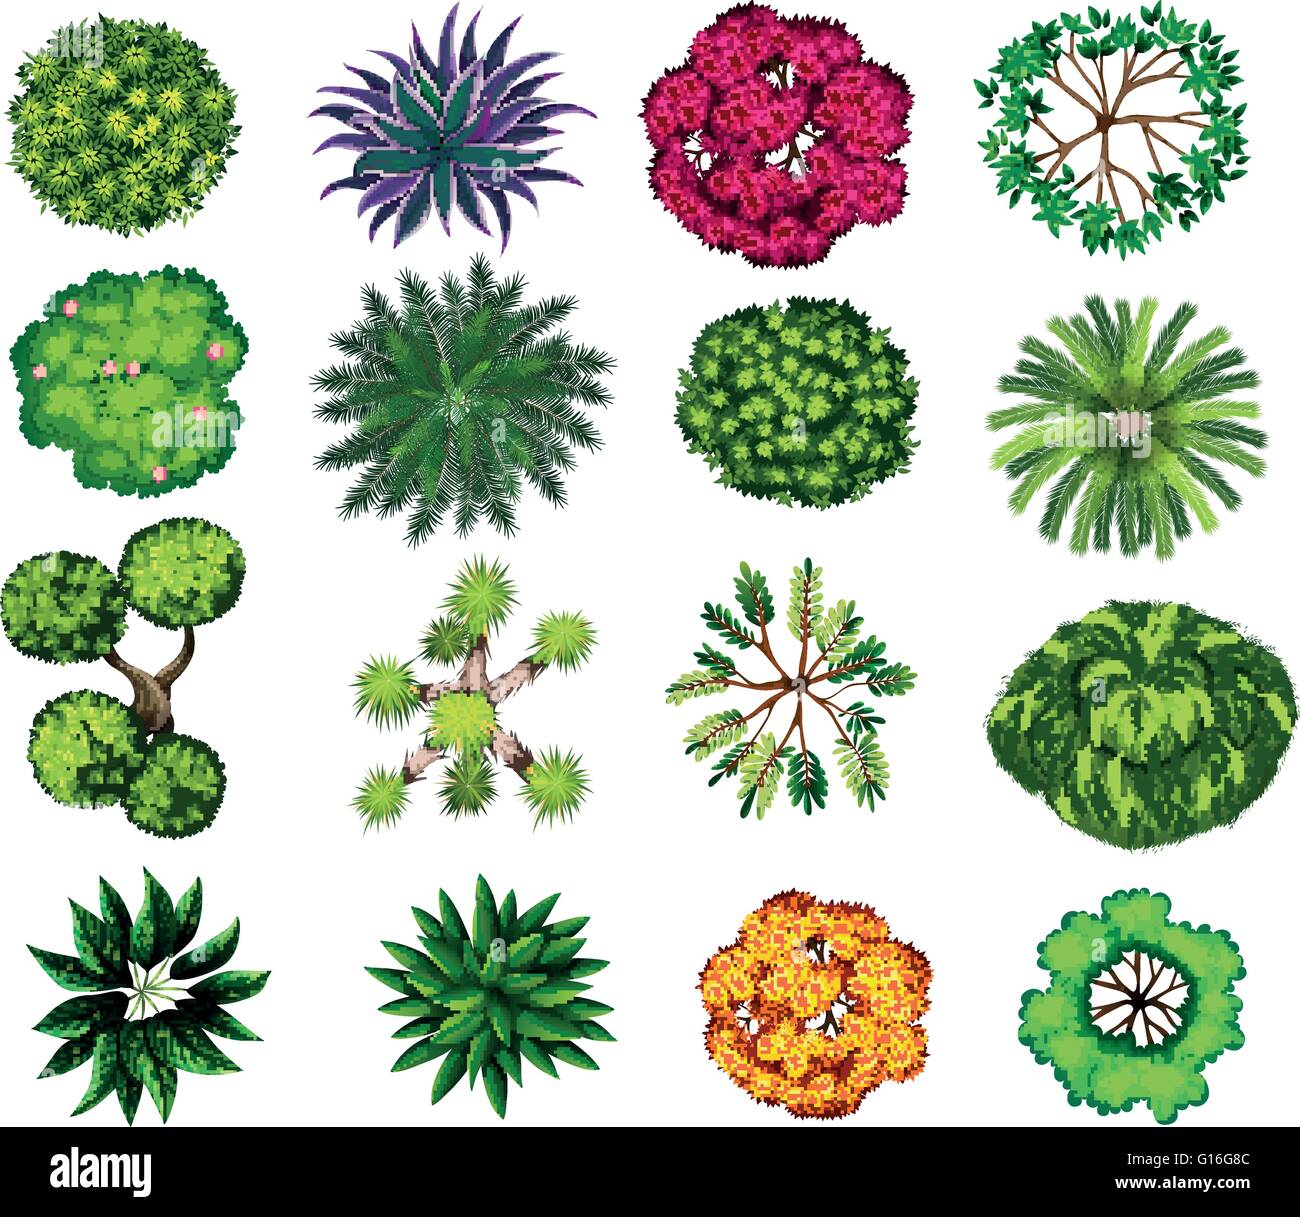 Different kind of plants illustration Stock Vector